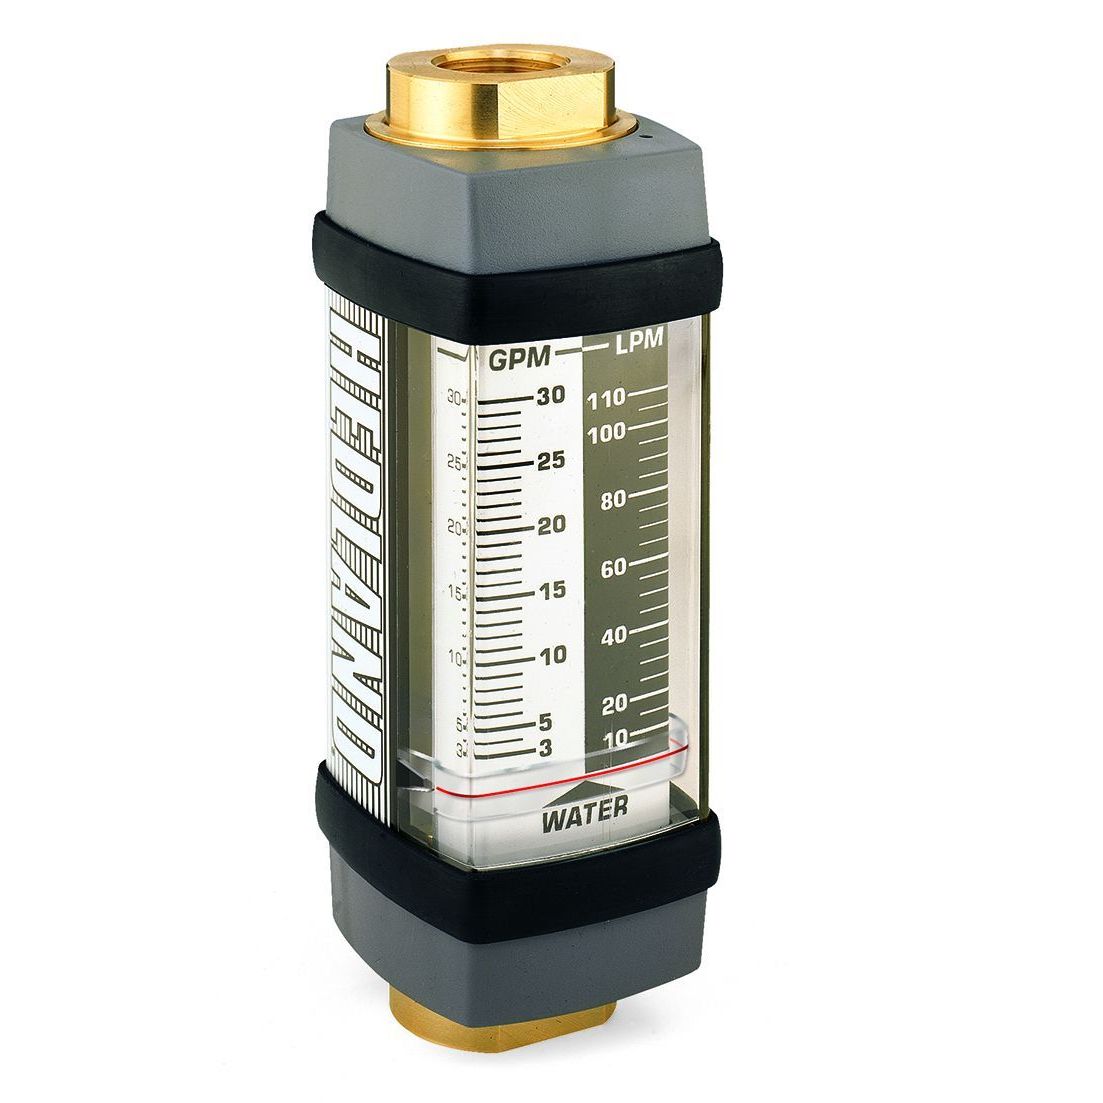 H754B-010 : Hedland 3500psi Brass Flow Meter for Water, #16 SAE (1), 0.1 to 1.0 GPM